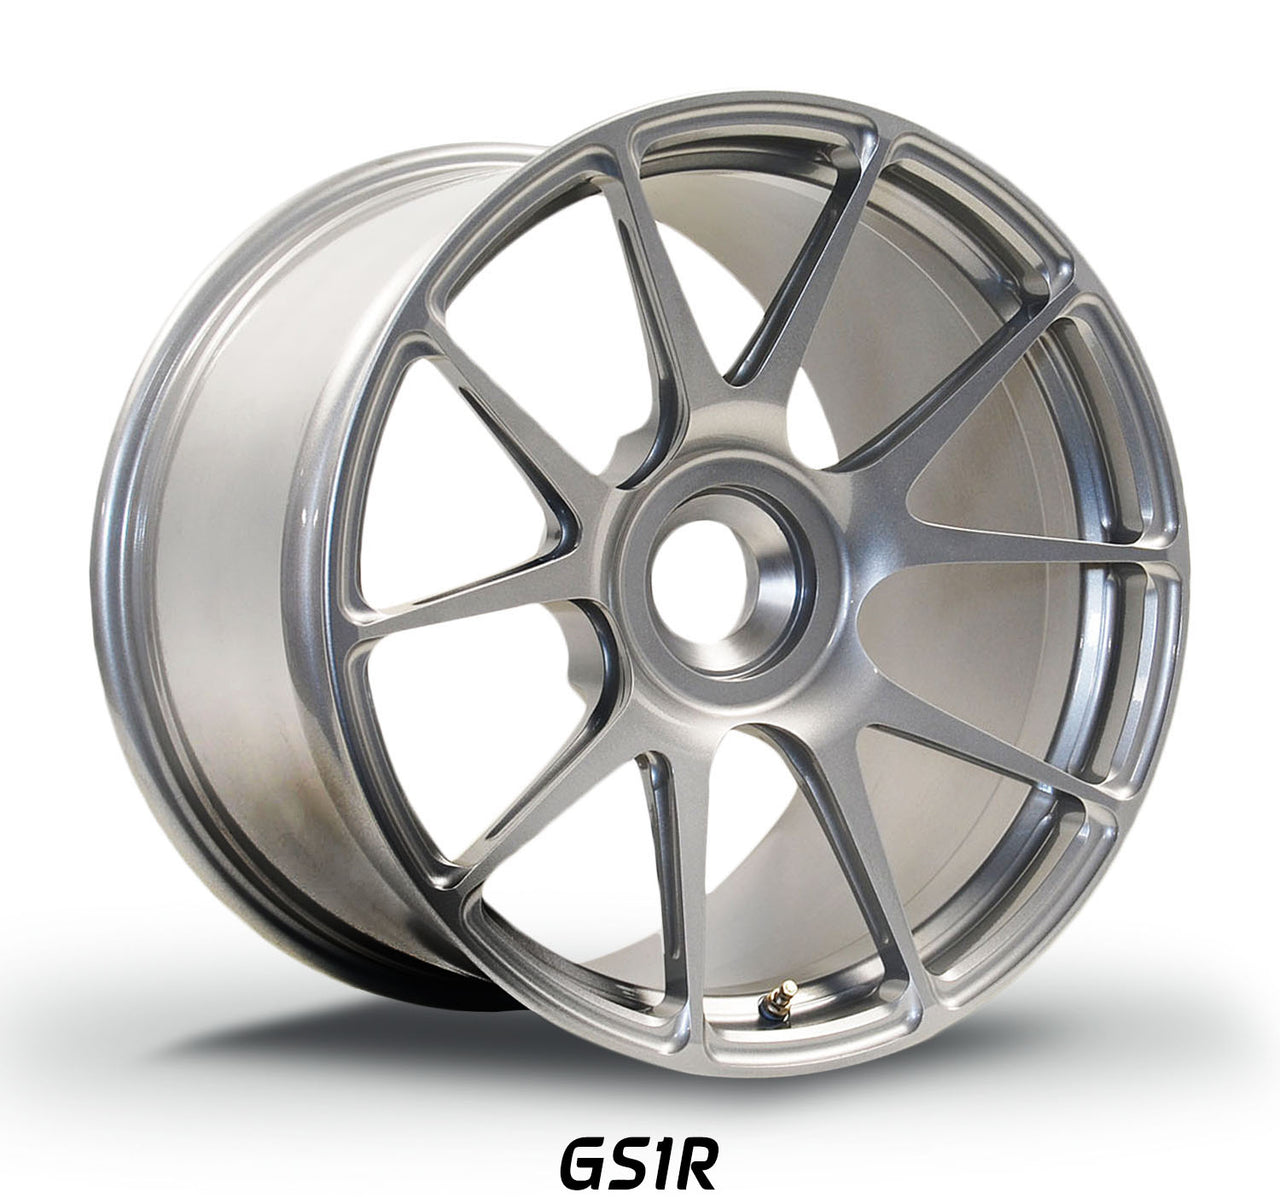 Porsche 2023 911 GT3 RS Forgeline GS1R premium forged racing wheel for track day, HPDE, Time Trials